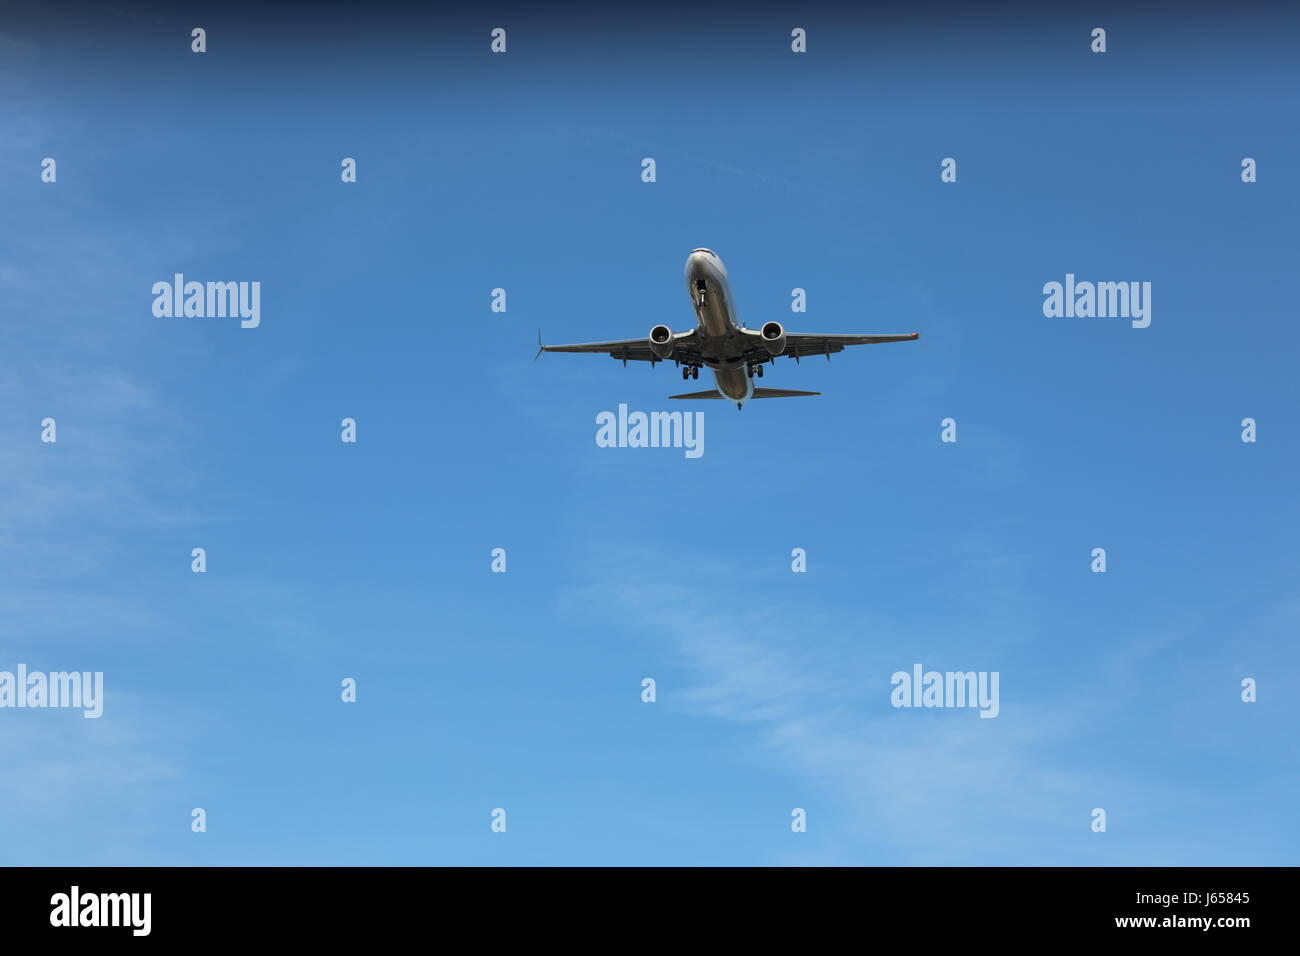 Airplane in the sky. Stock Photo